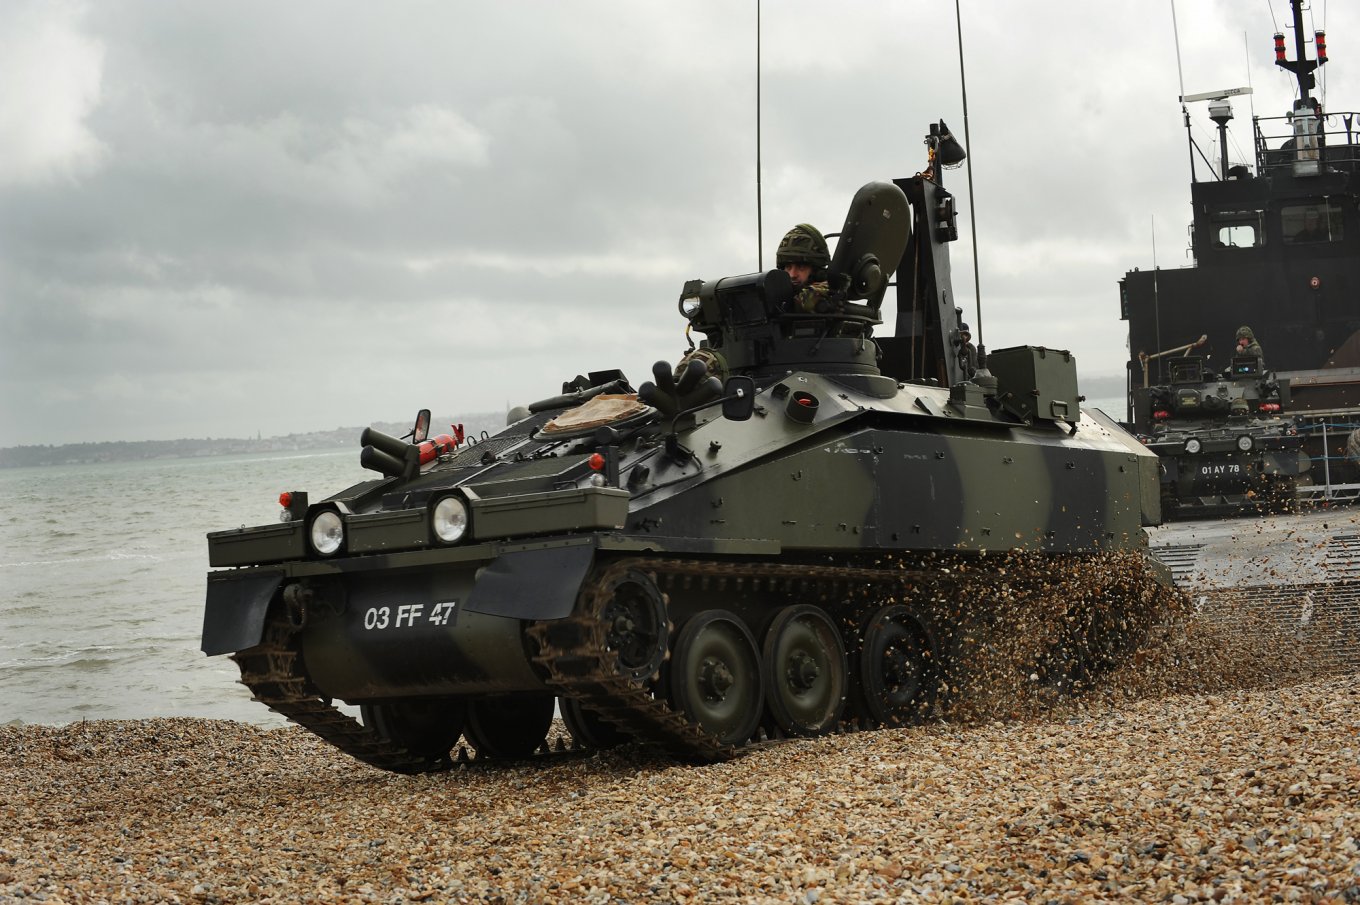 Spartan armoured personnel carriers, Defense Express